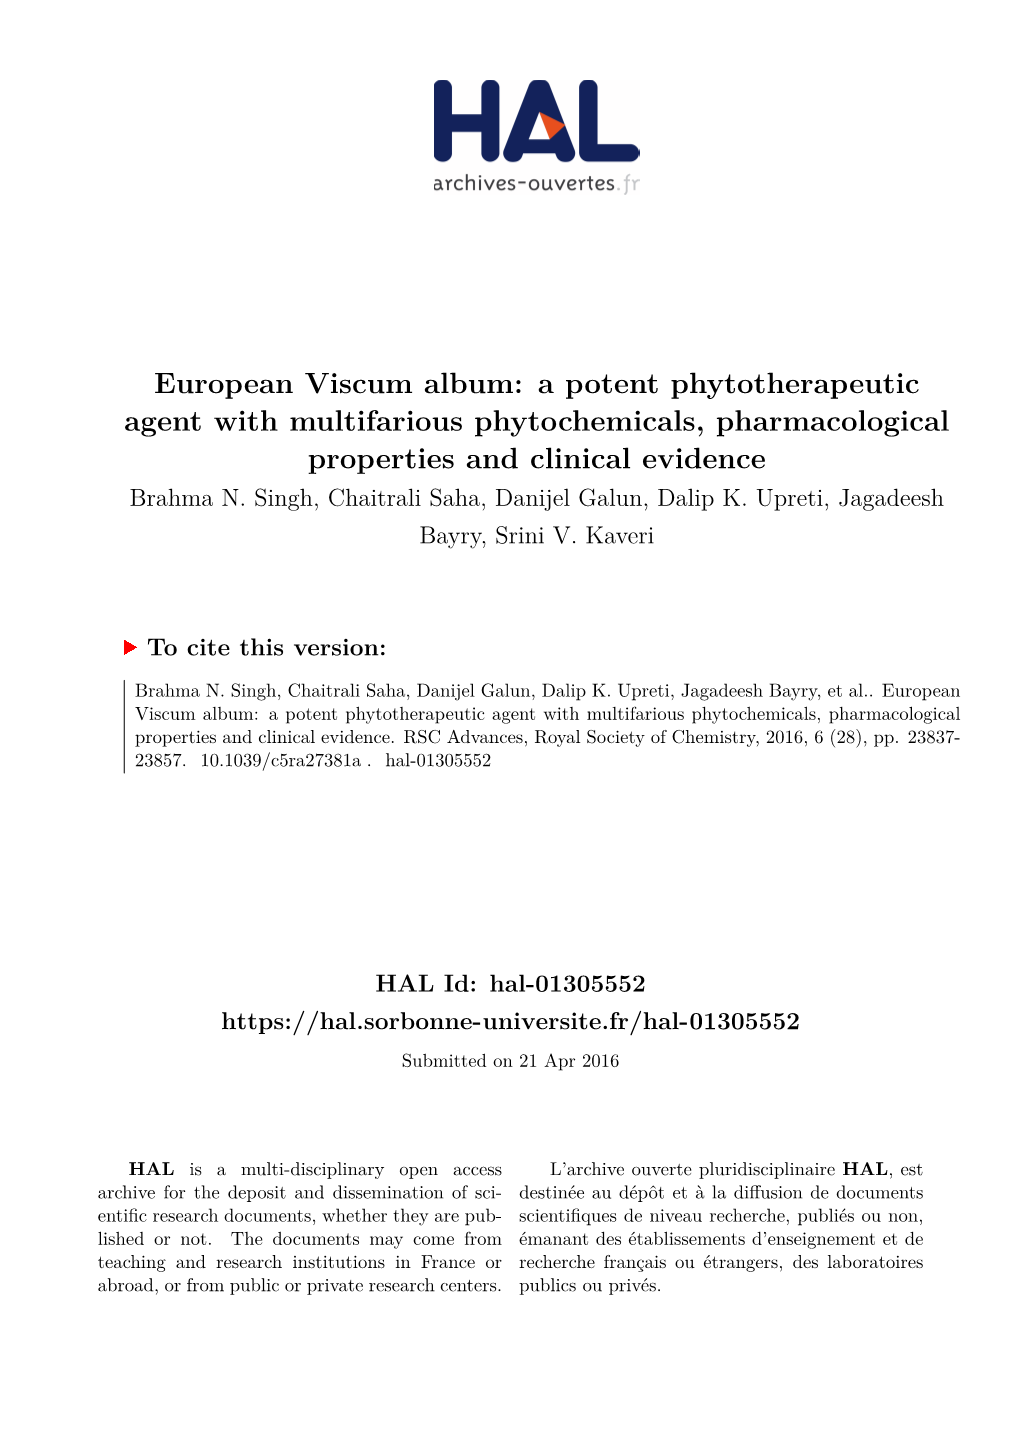 European Viscum Album: a Potent Phytotherapeutic Agent with Multifarious Phytochemicals, Pharmacological Properties and Clinical Evidence Brahma N